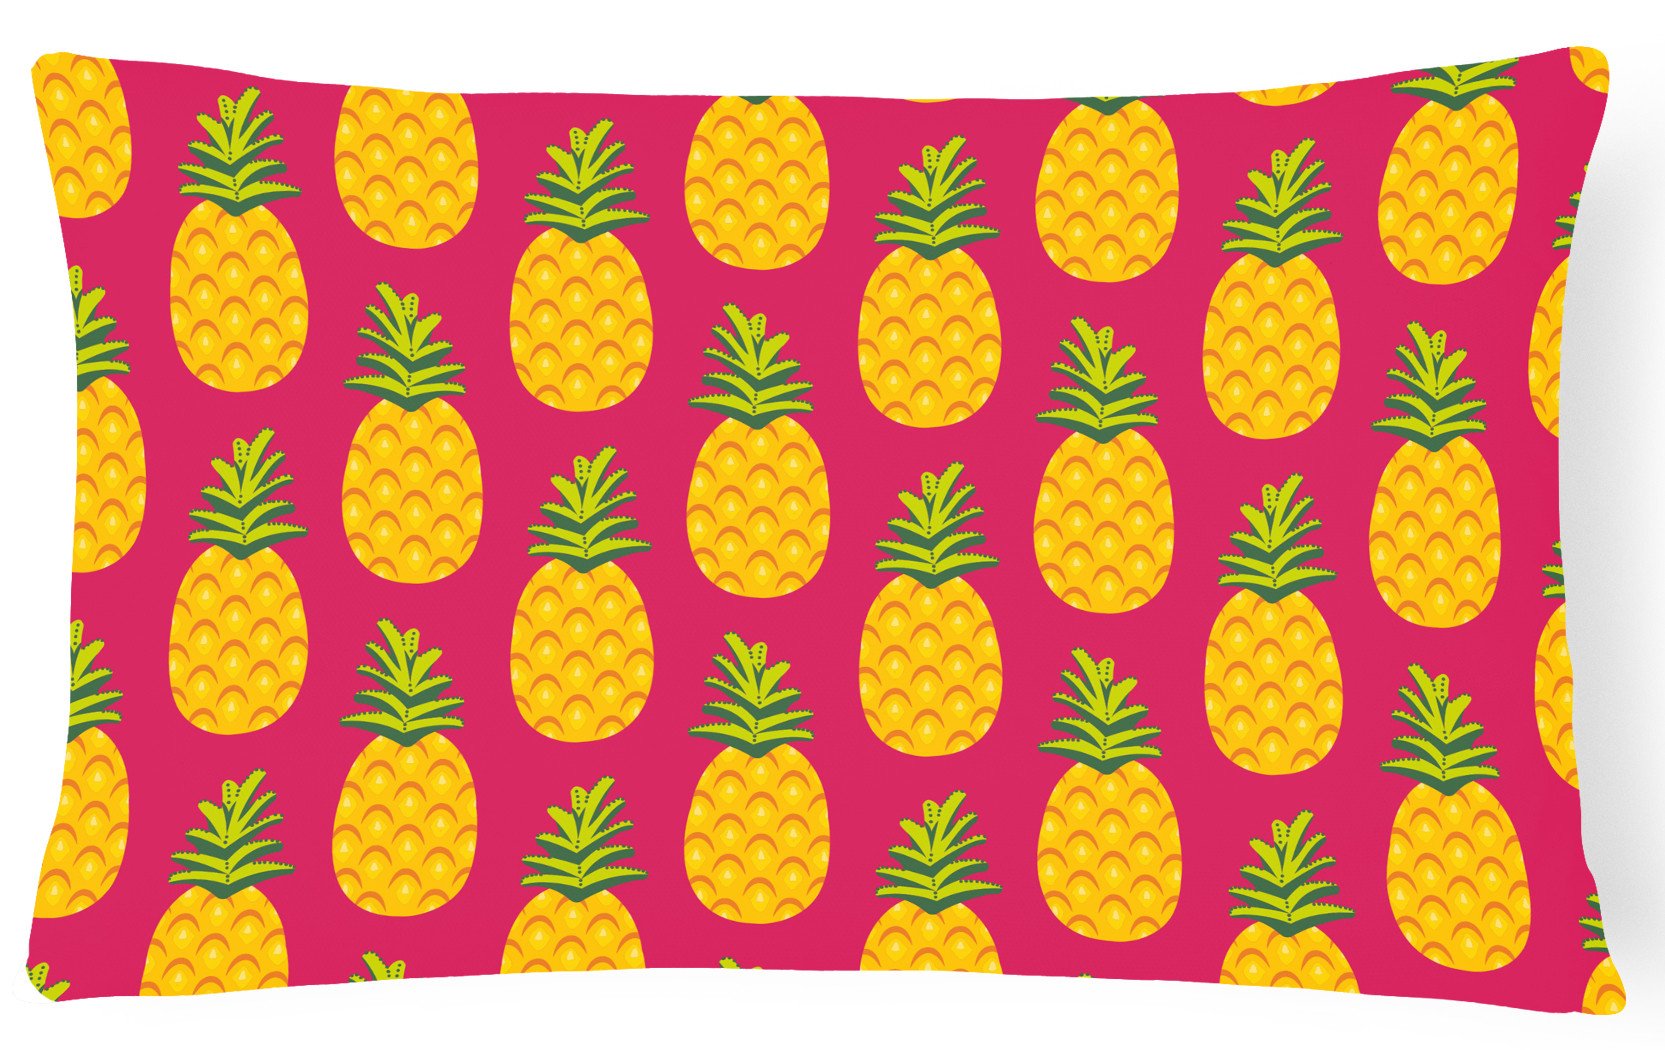 Pineapples on Pink Canvas Fabric Decorative Pillow BB5136PW1216 by Caroline's Treasures